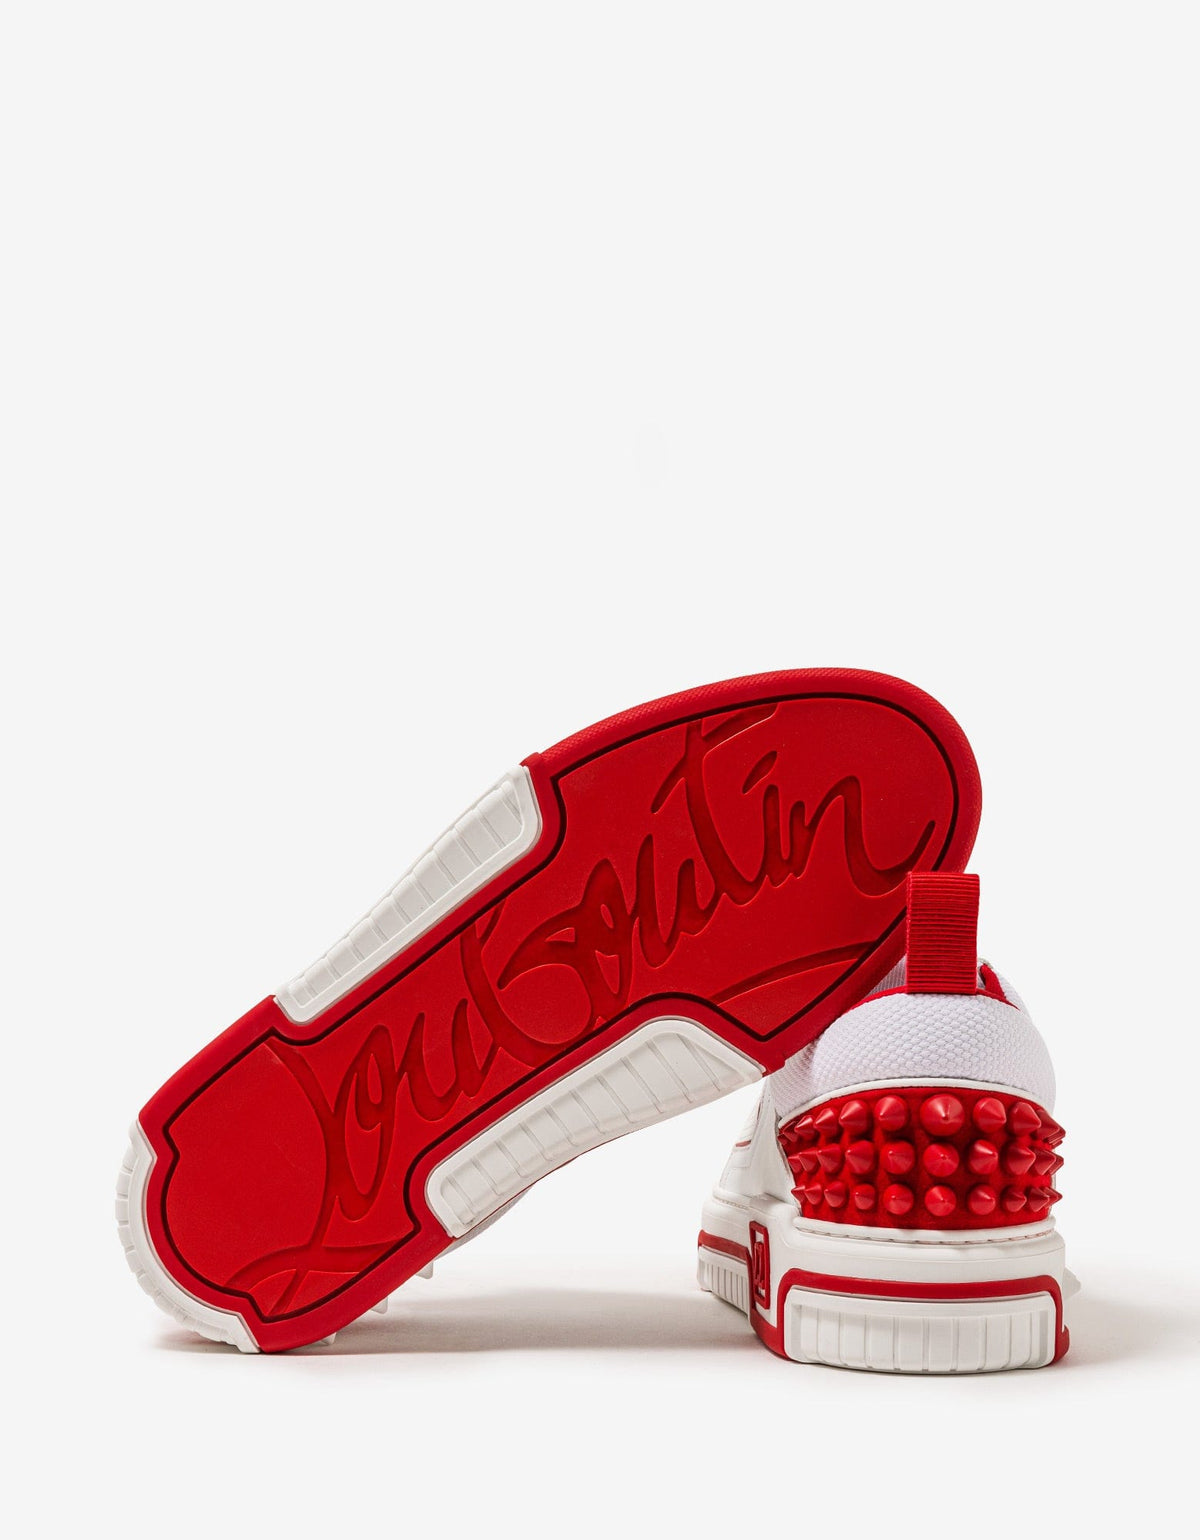 Christian Louboutin Astroloubi White & Red Trainers